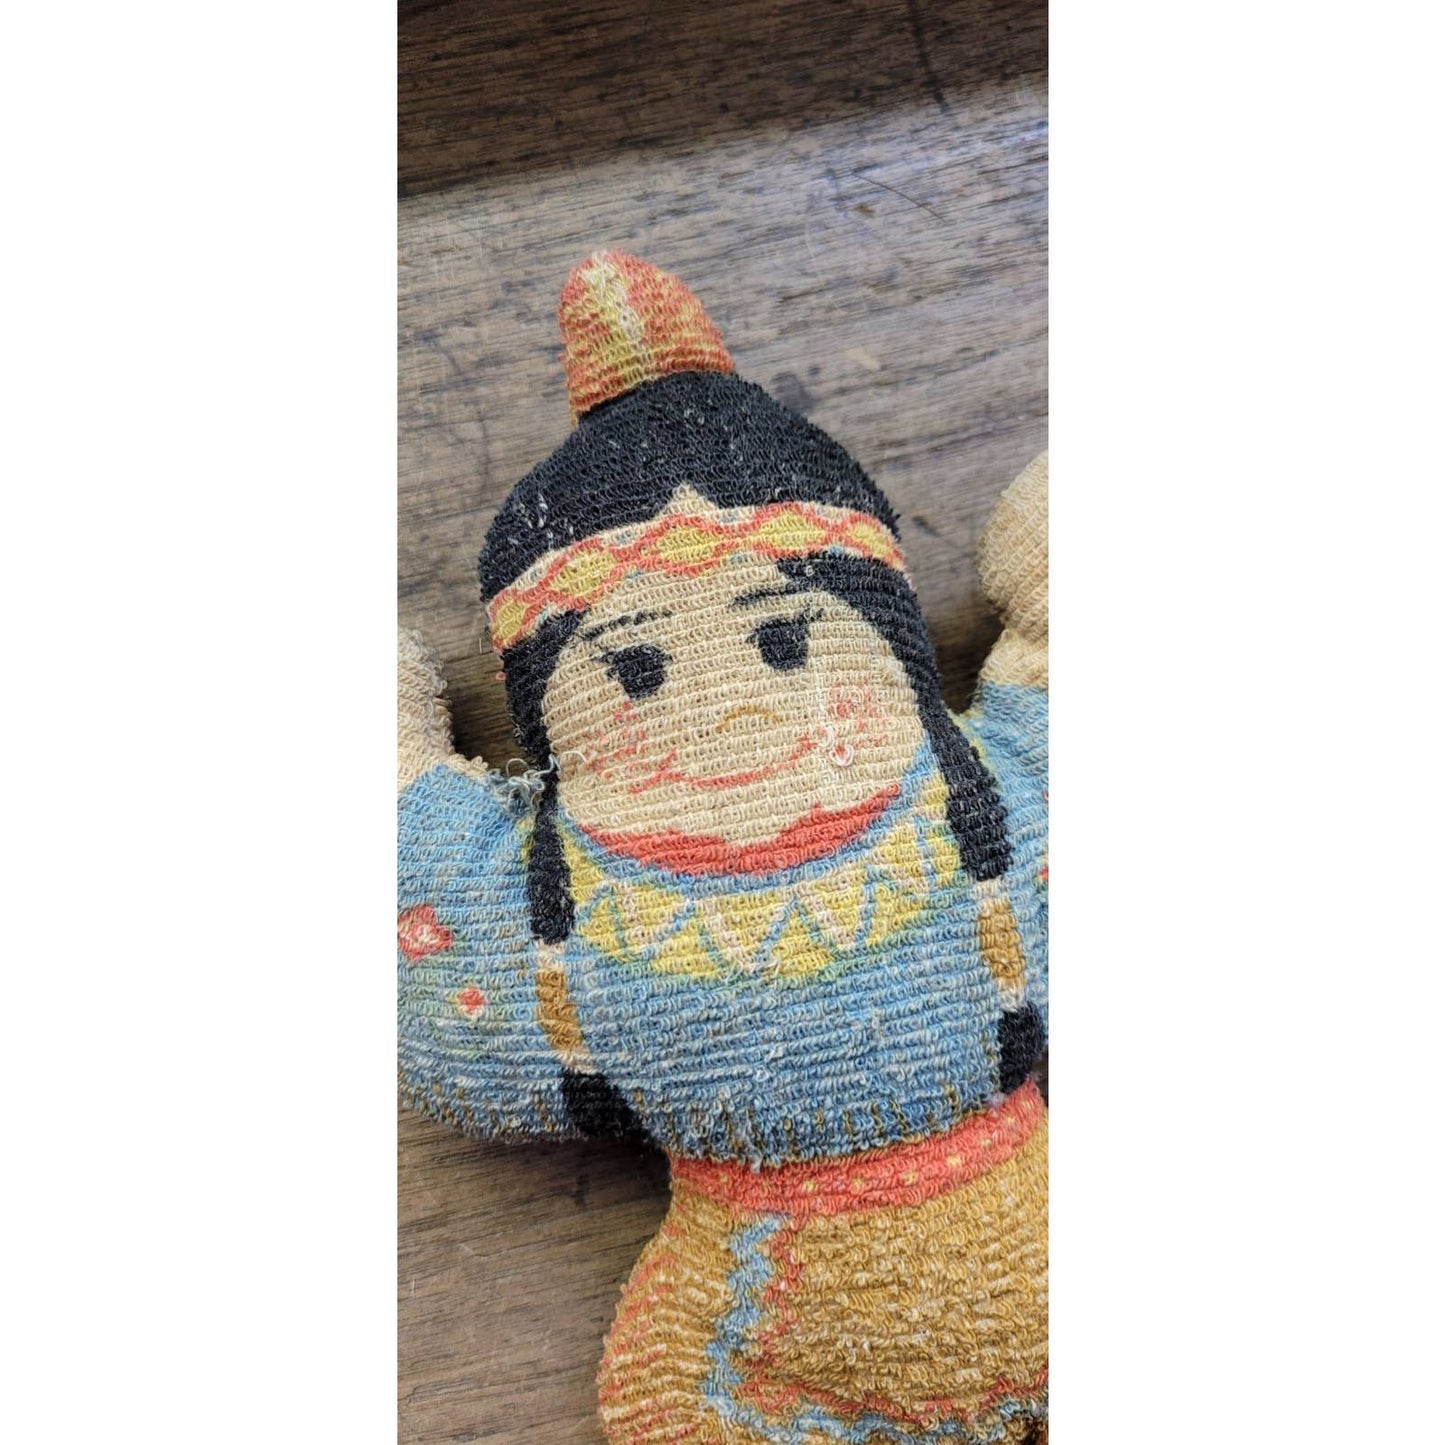 Vintage Native American Indian Doll